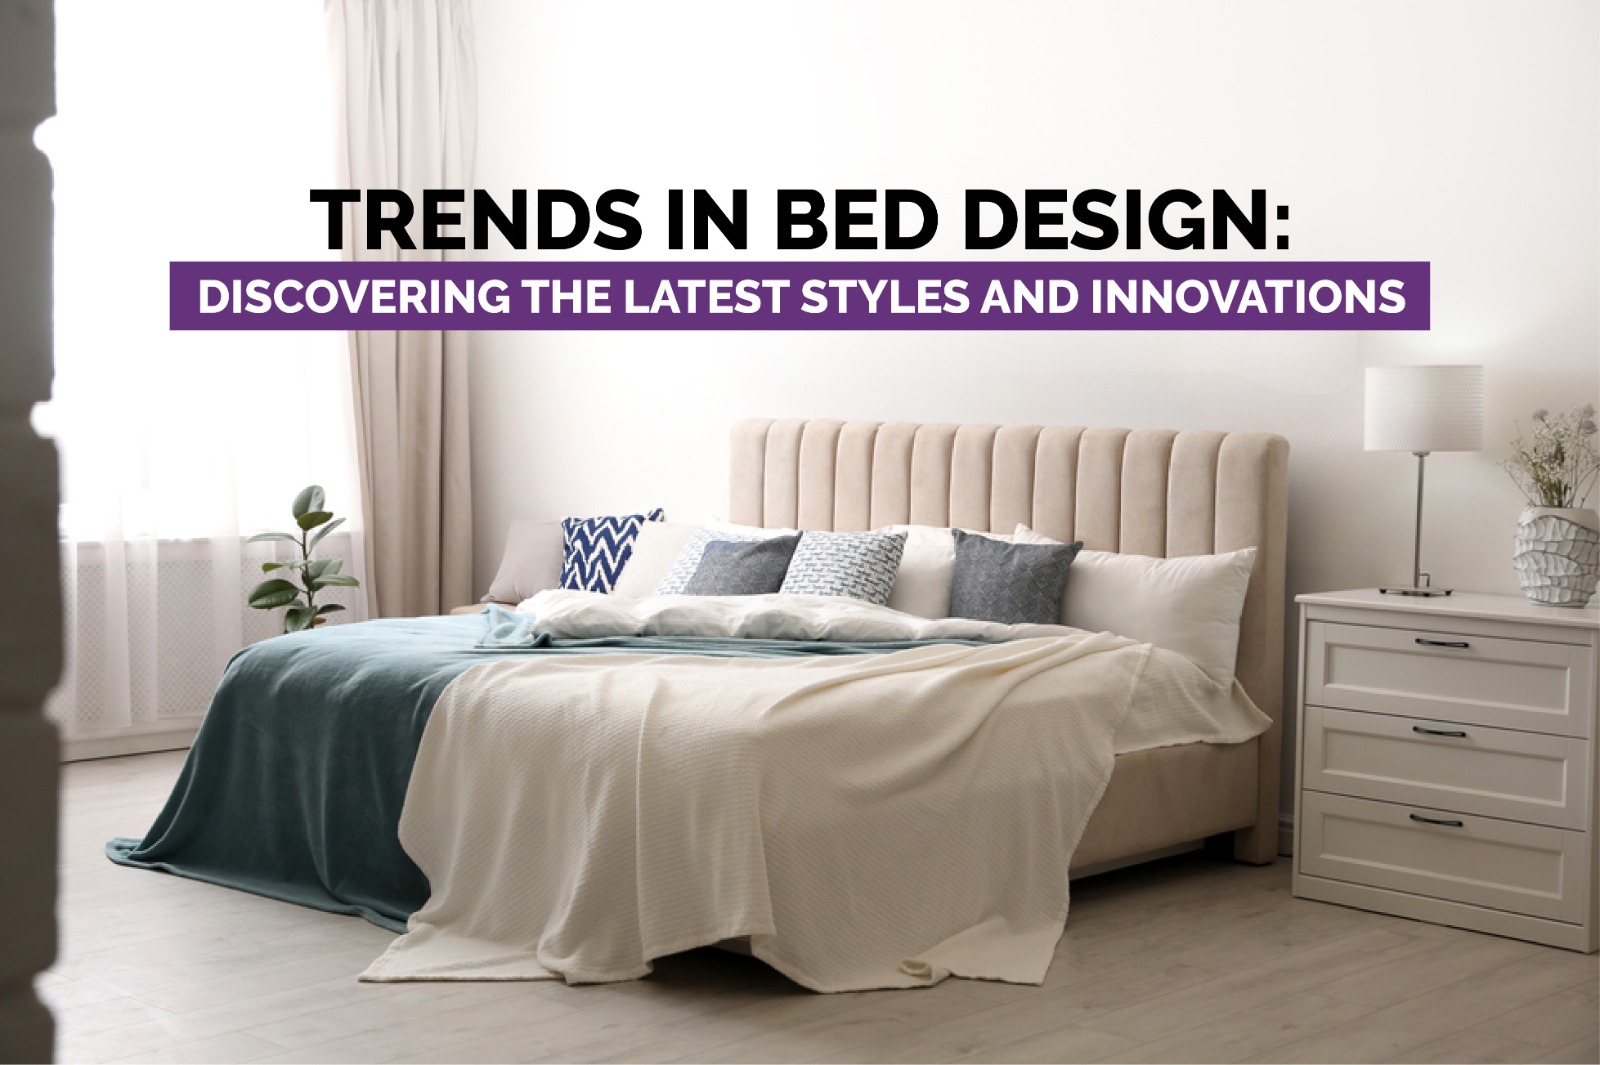 Trends in Bed Design: Discovering the Latest Styles and Innovation